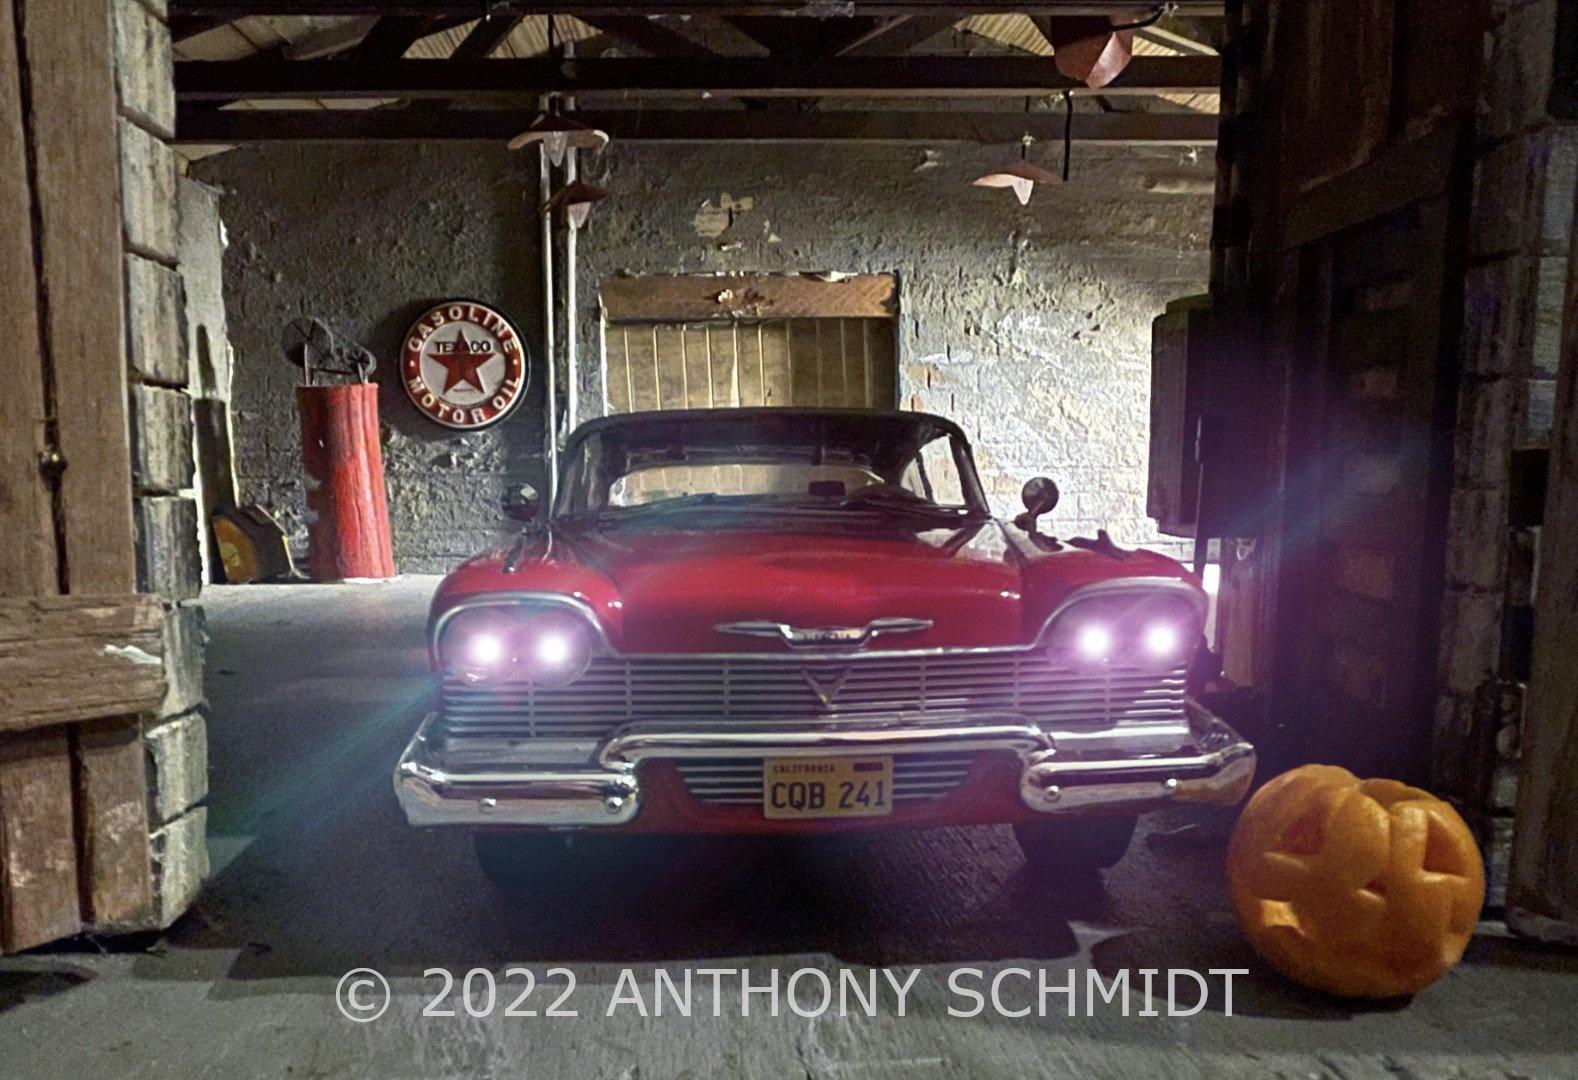 1958 Plymouth Fury (2 of 2)